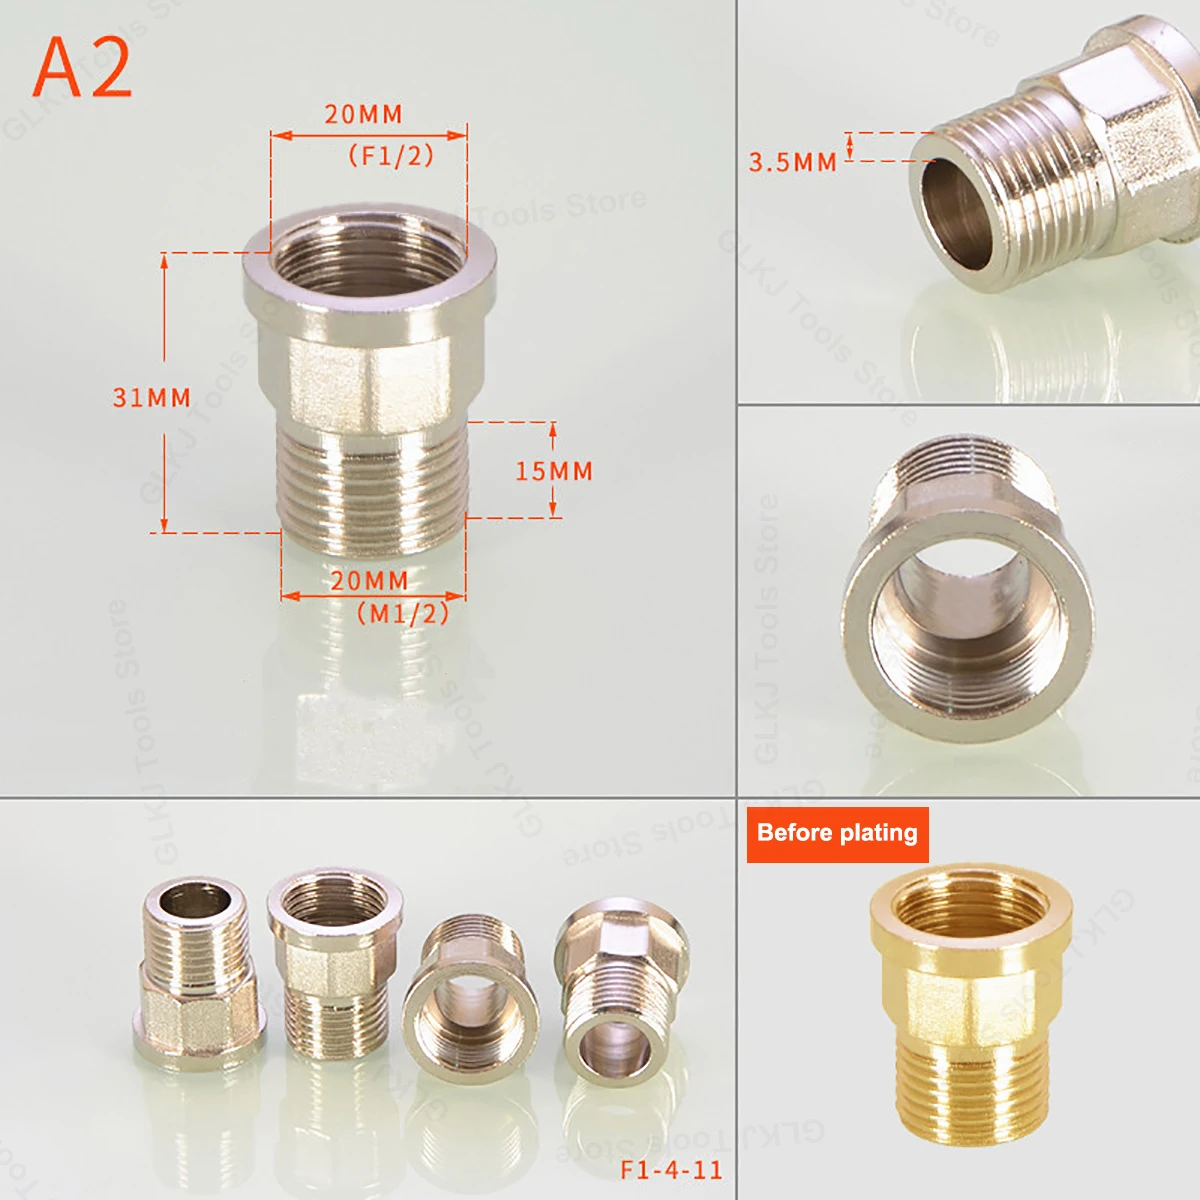 1/2" BSP Ni-plated Brass Fittings Male x Female Extension Connector 10mm-100mm L 